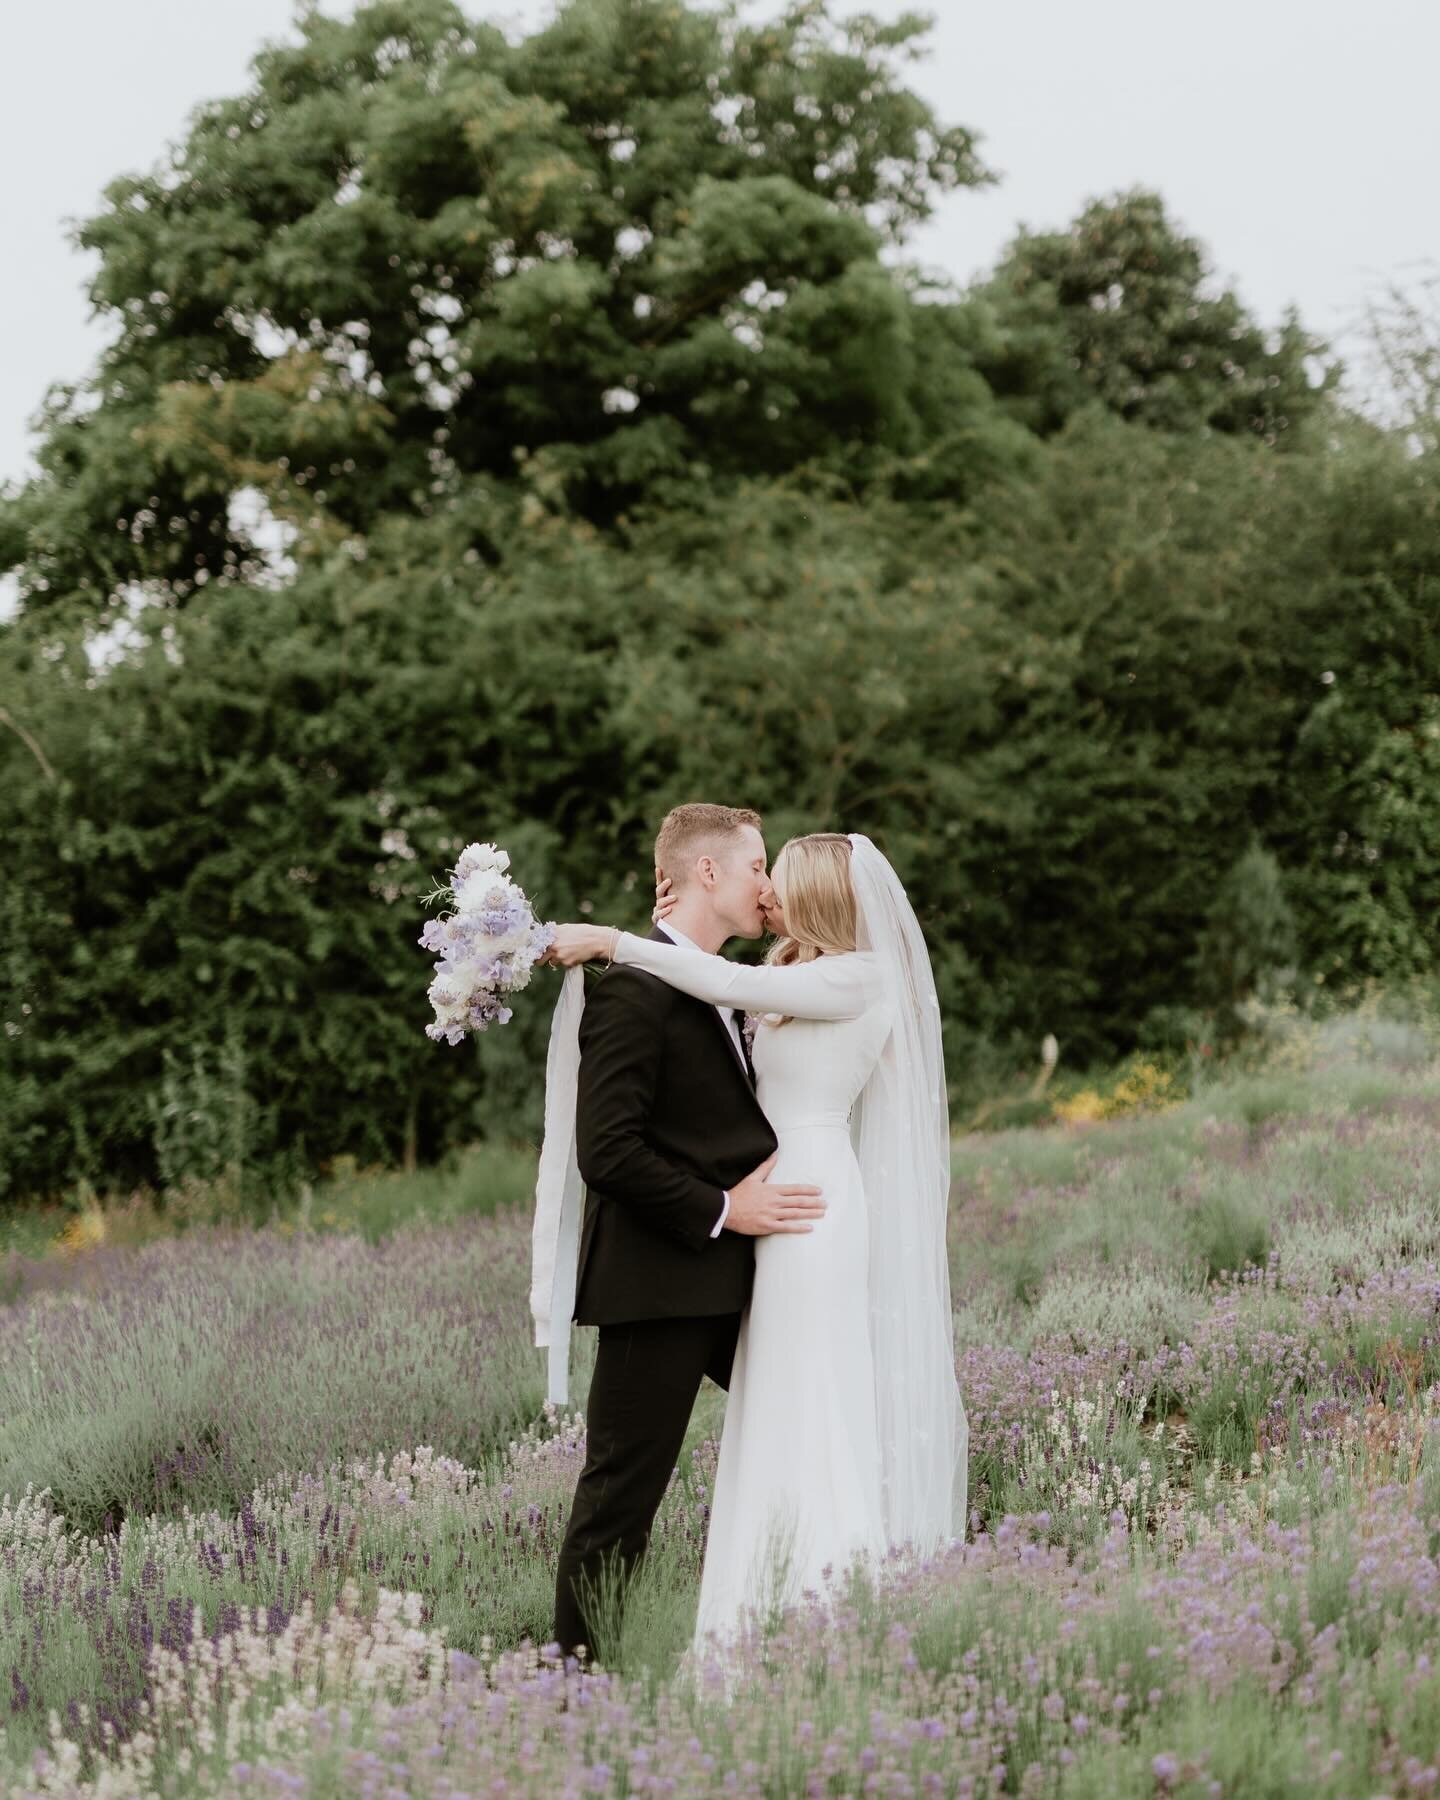 Provence lavender field collaboration with the incredible @amandawhiston_weddings and @katie.olivier.blooms 

One of my favourite things to do throughout the season, and the down season, is to collaborate with planners and vendors on editorials. 

We